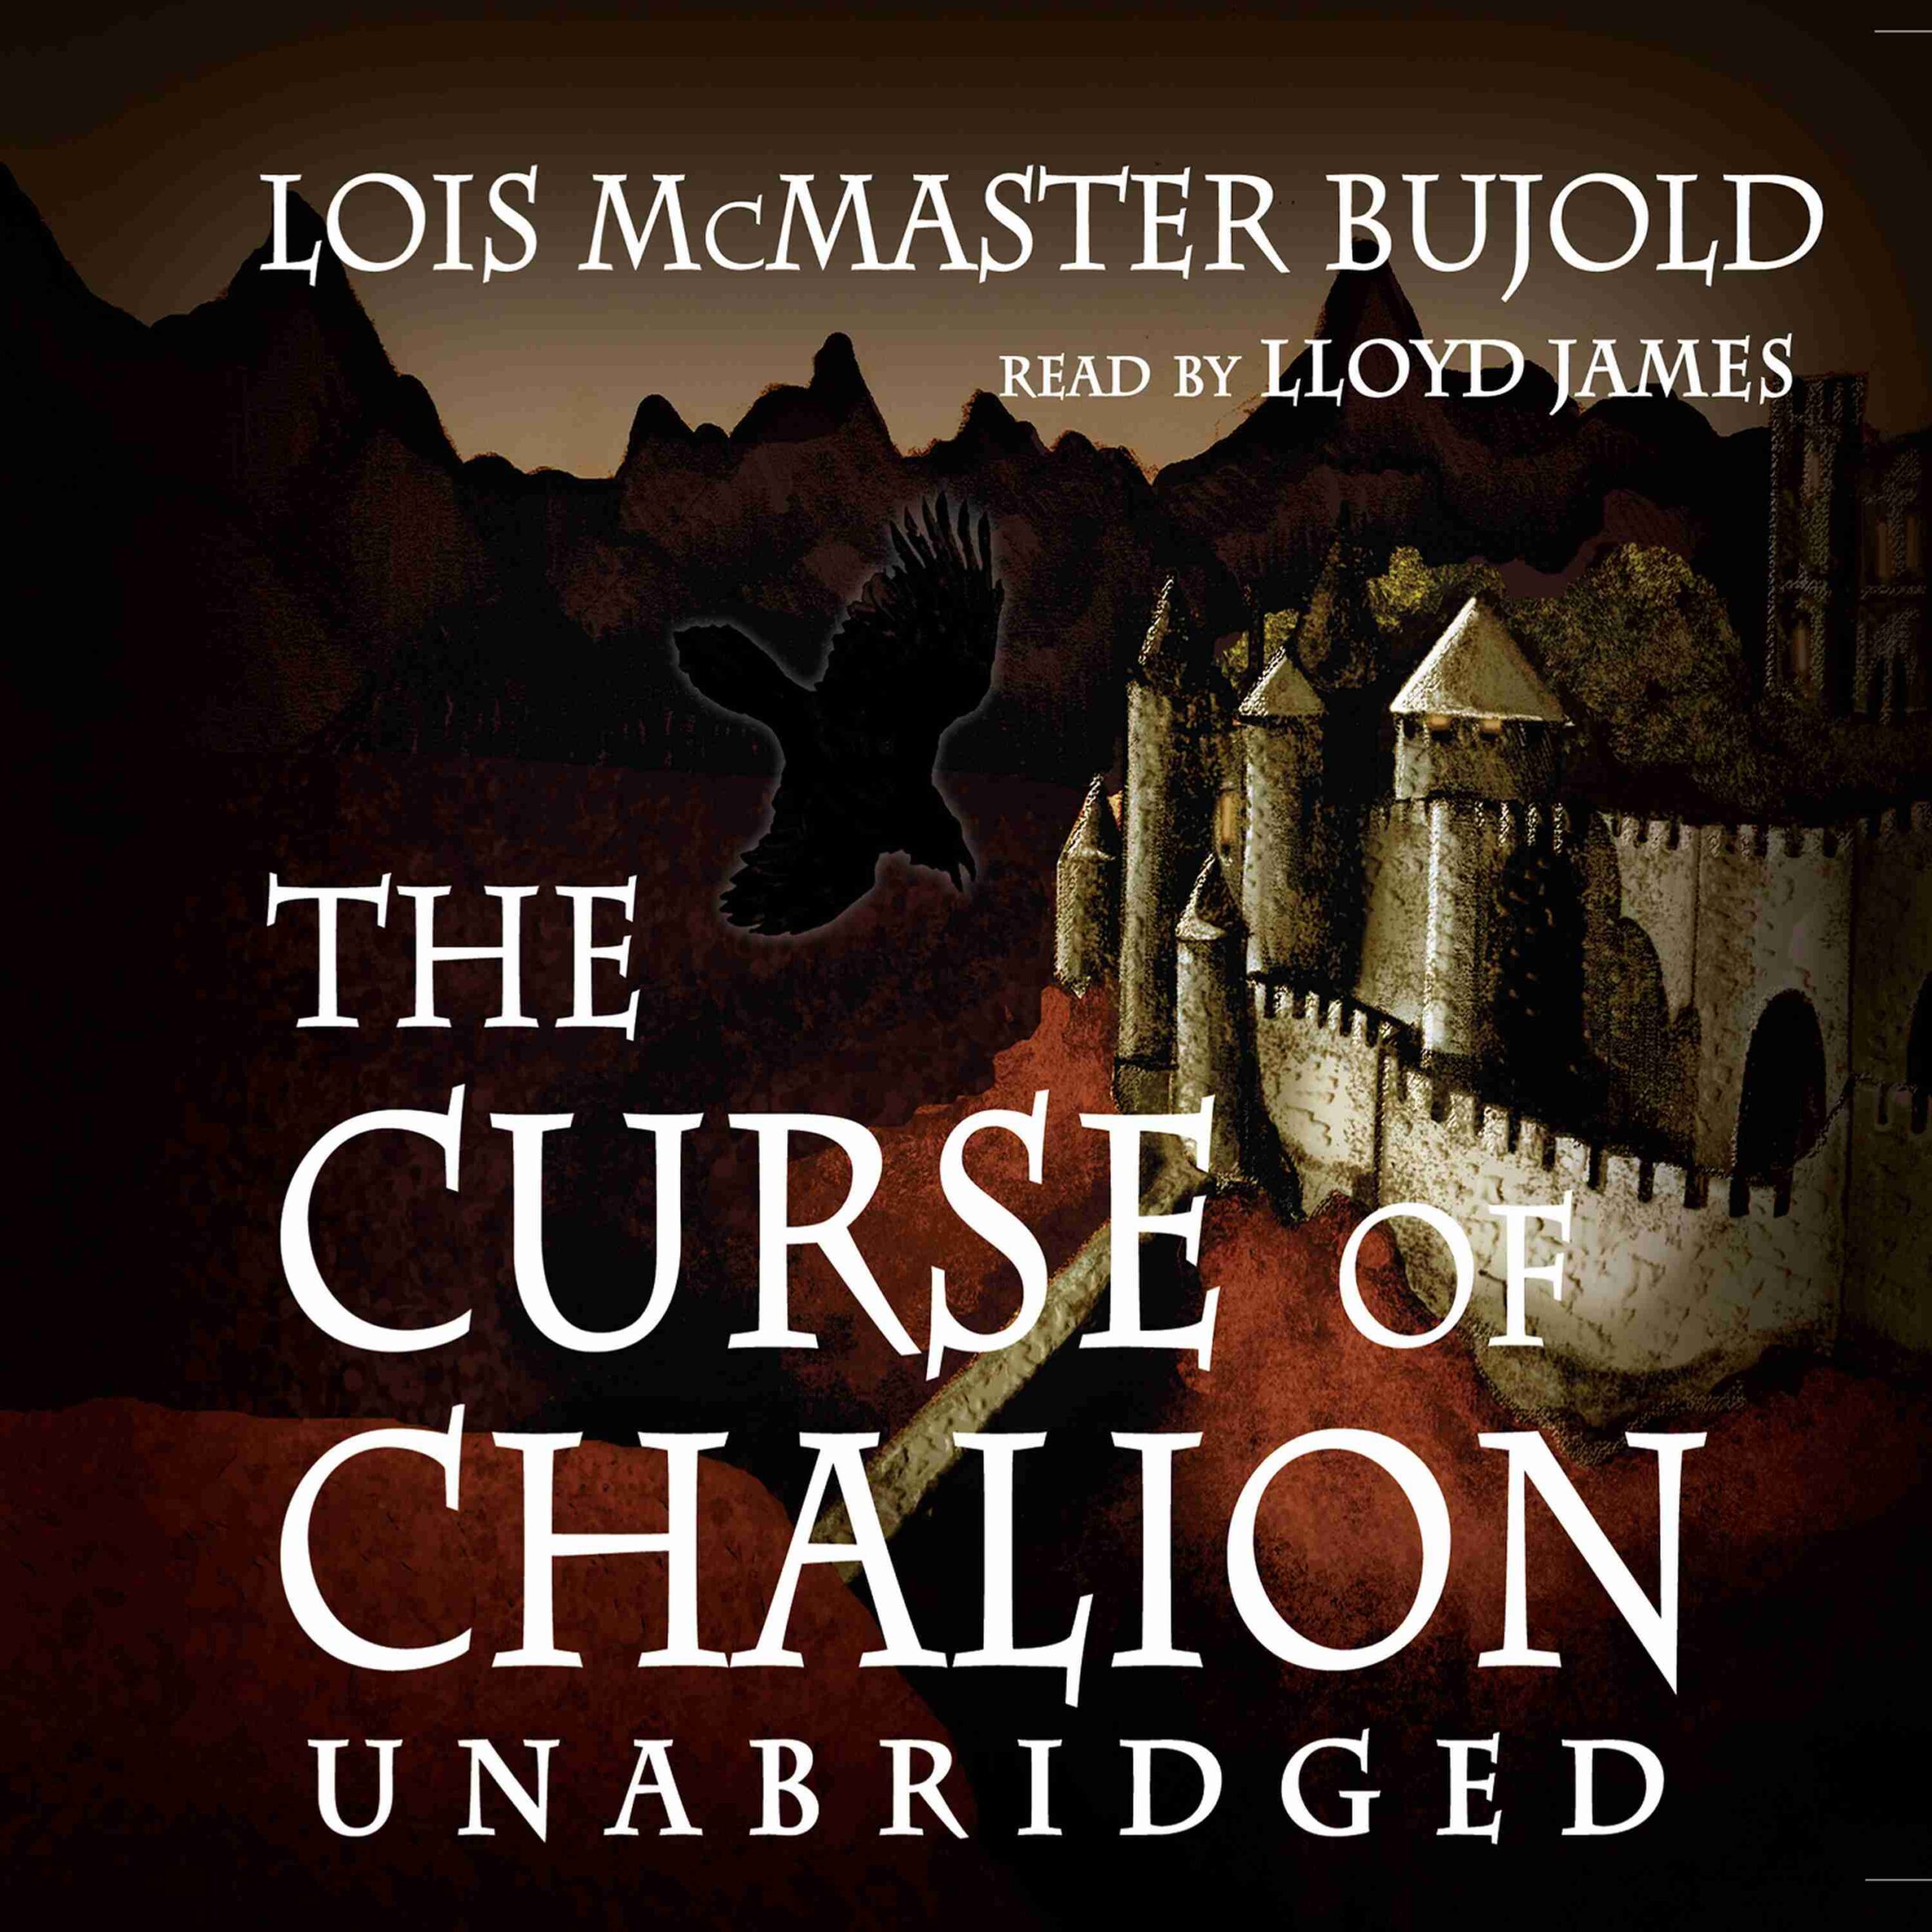 The Curse of Chalion byLois McMaster Bujold Audiobook. 31.95 USD